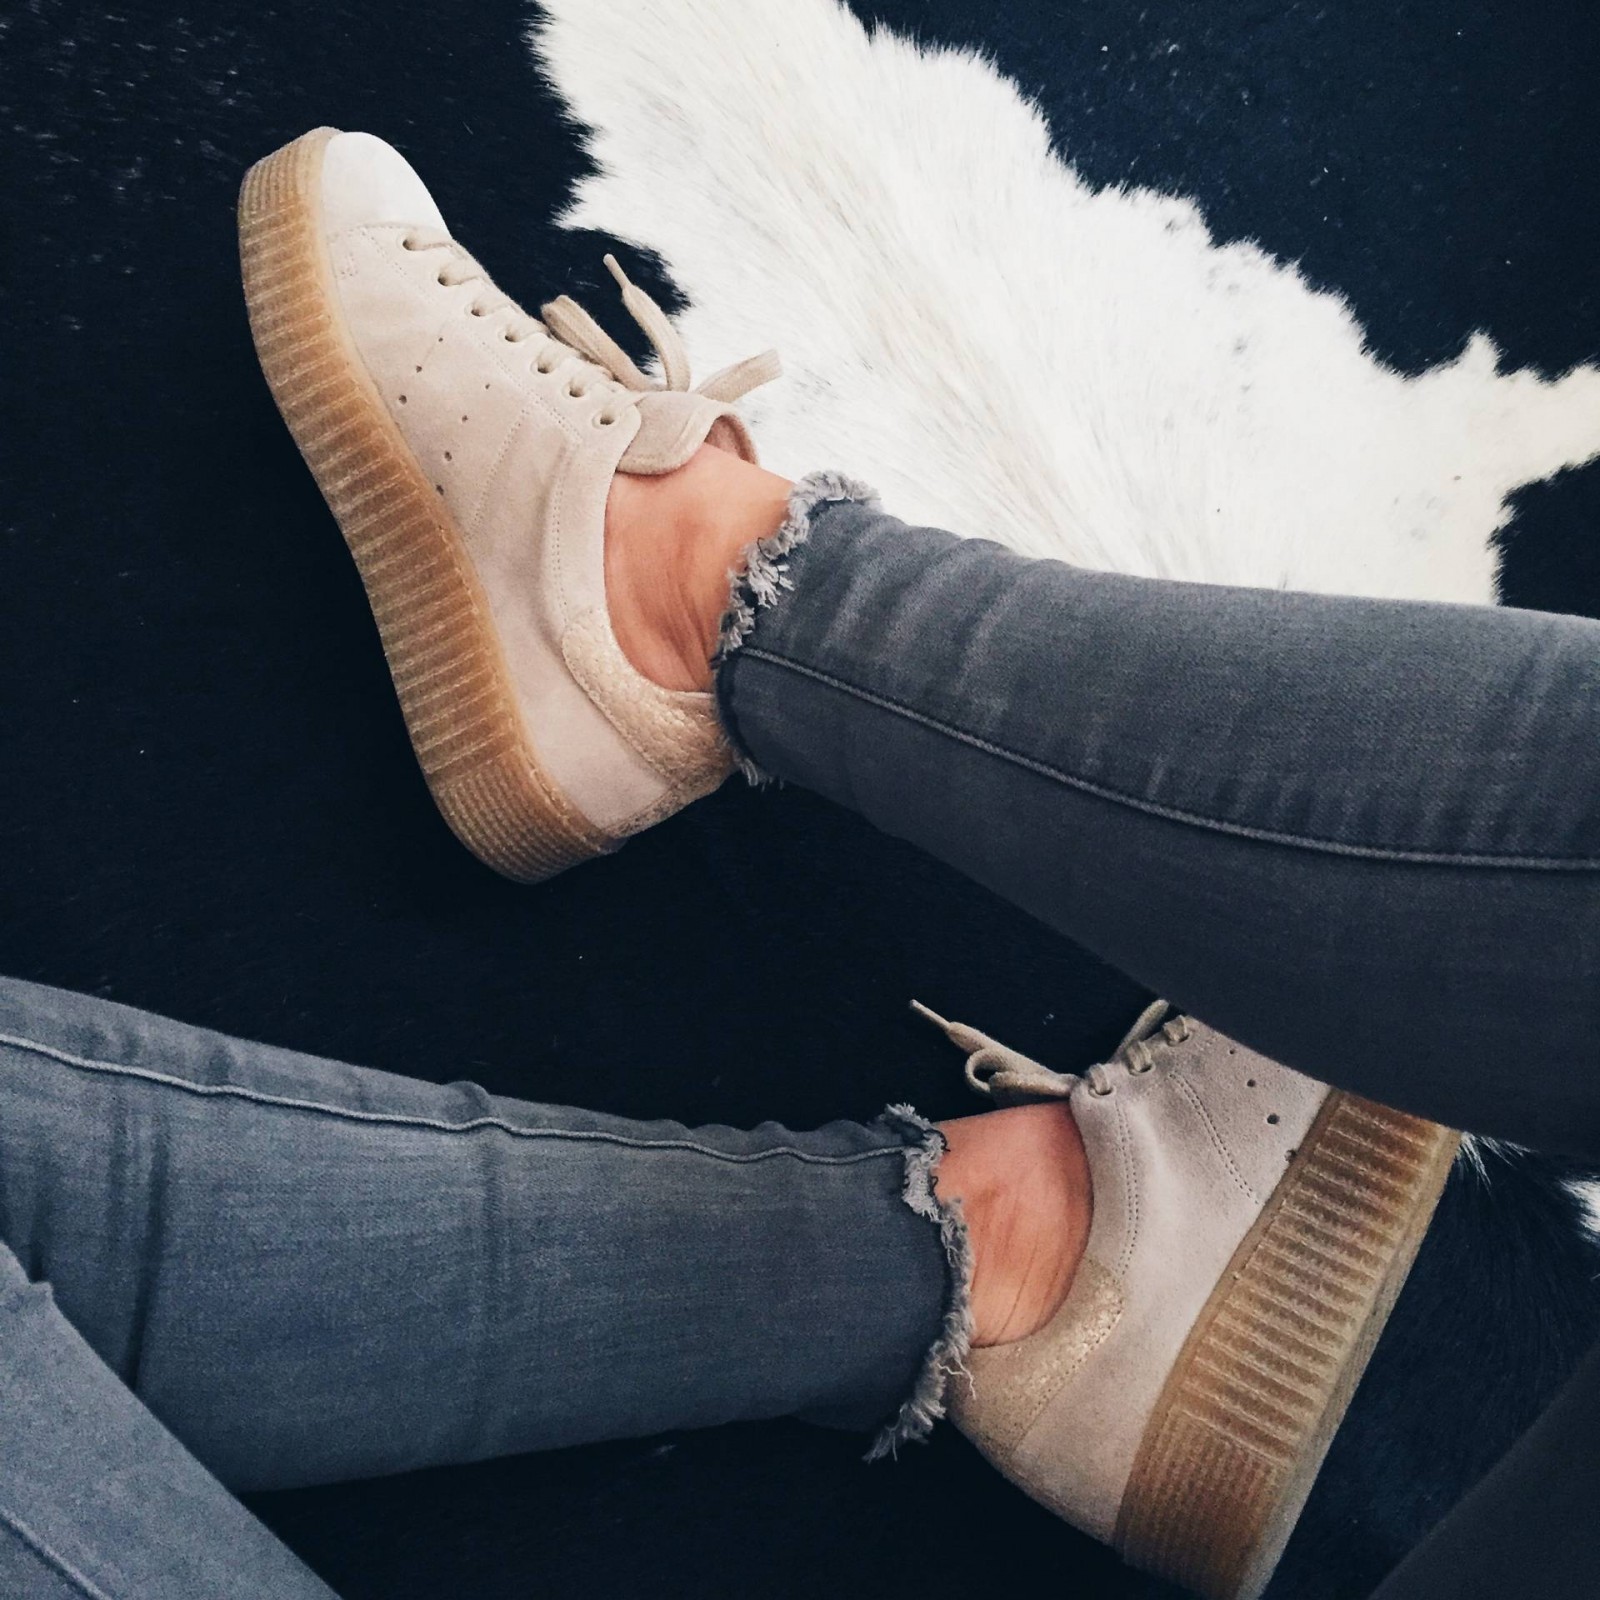 totaal Aanbeveling Continent New in: Look-a-like Rihanna for Puma creepers - OurFavourites